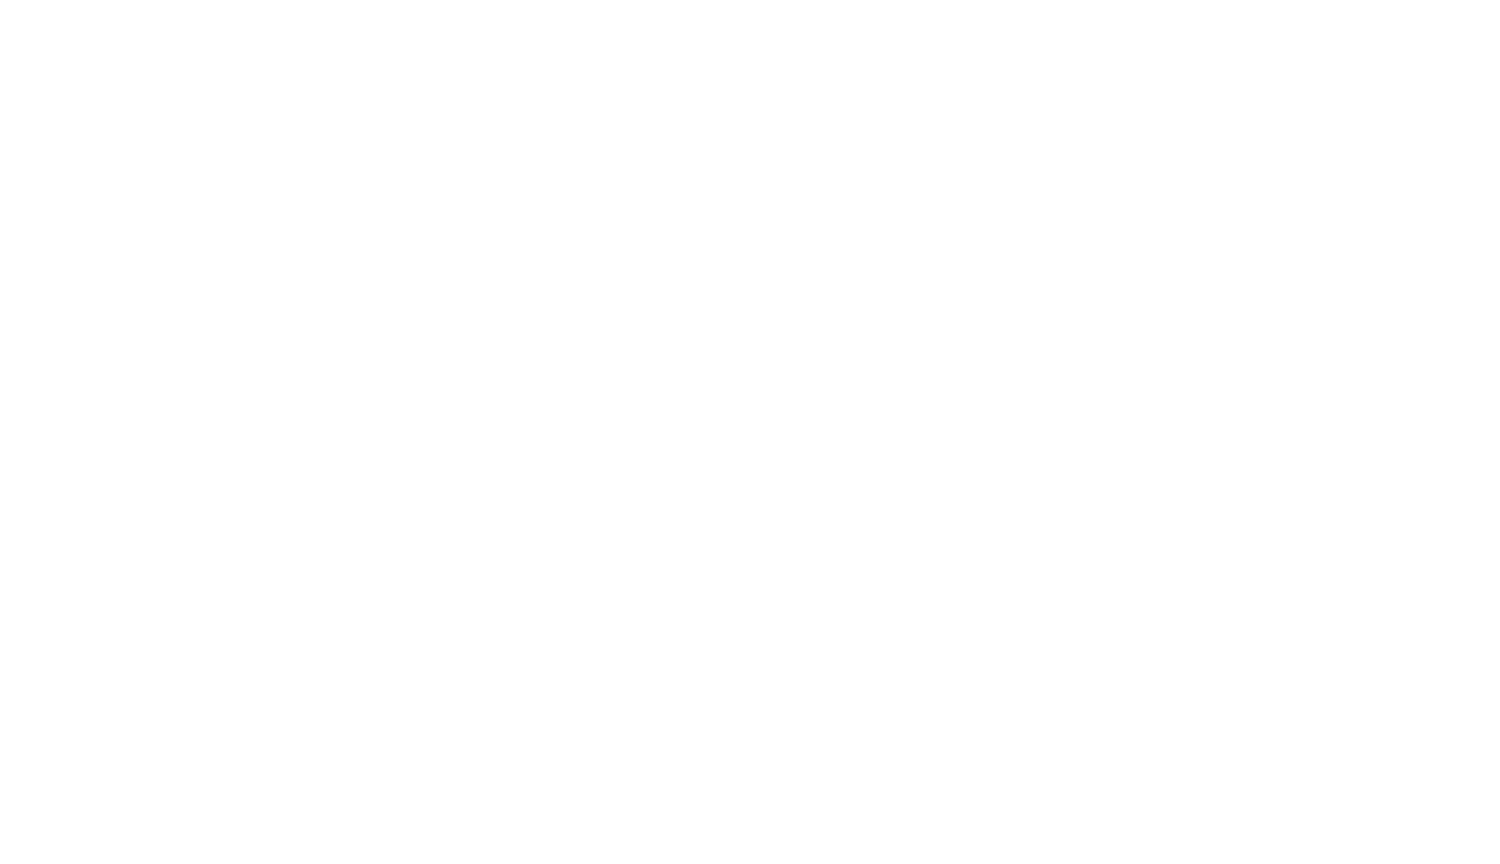 THE STEP-UP SORORITY